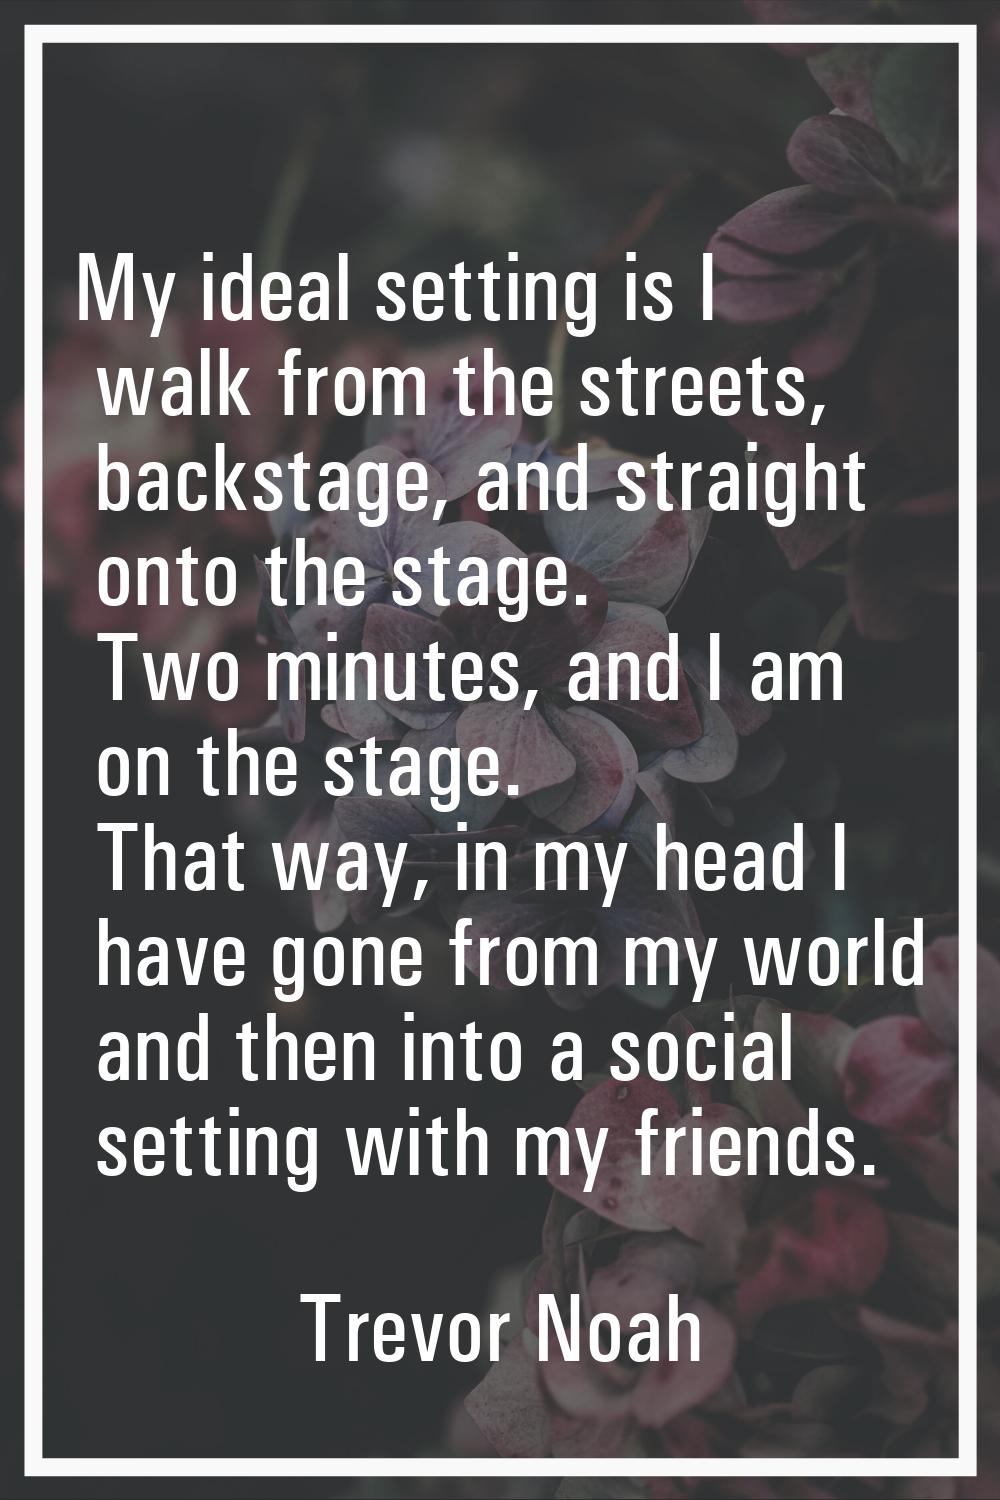 My ideal setting is I walk from the streets, backstage, and straight onto the stage. Two minutes, a